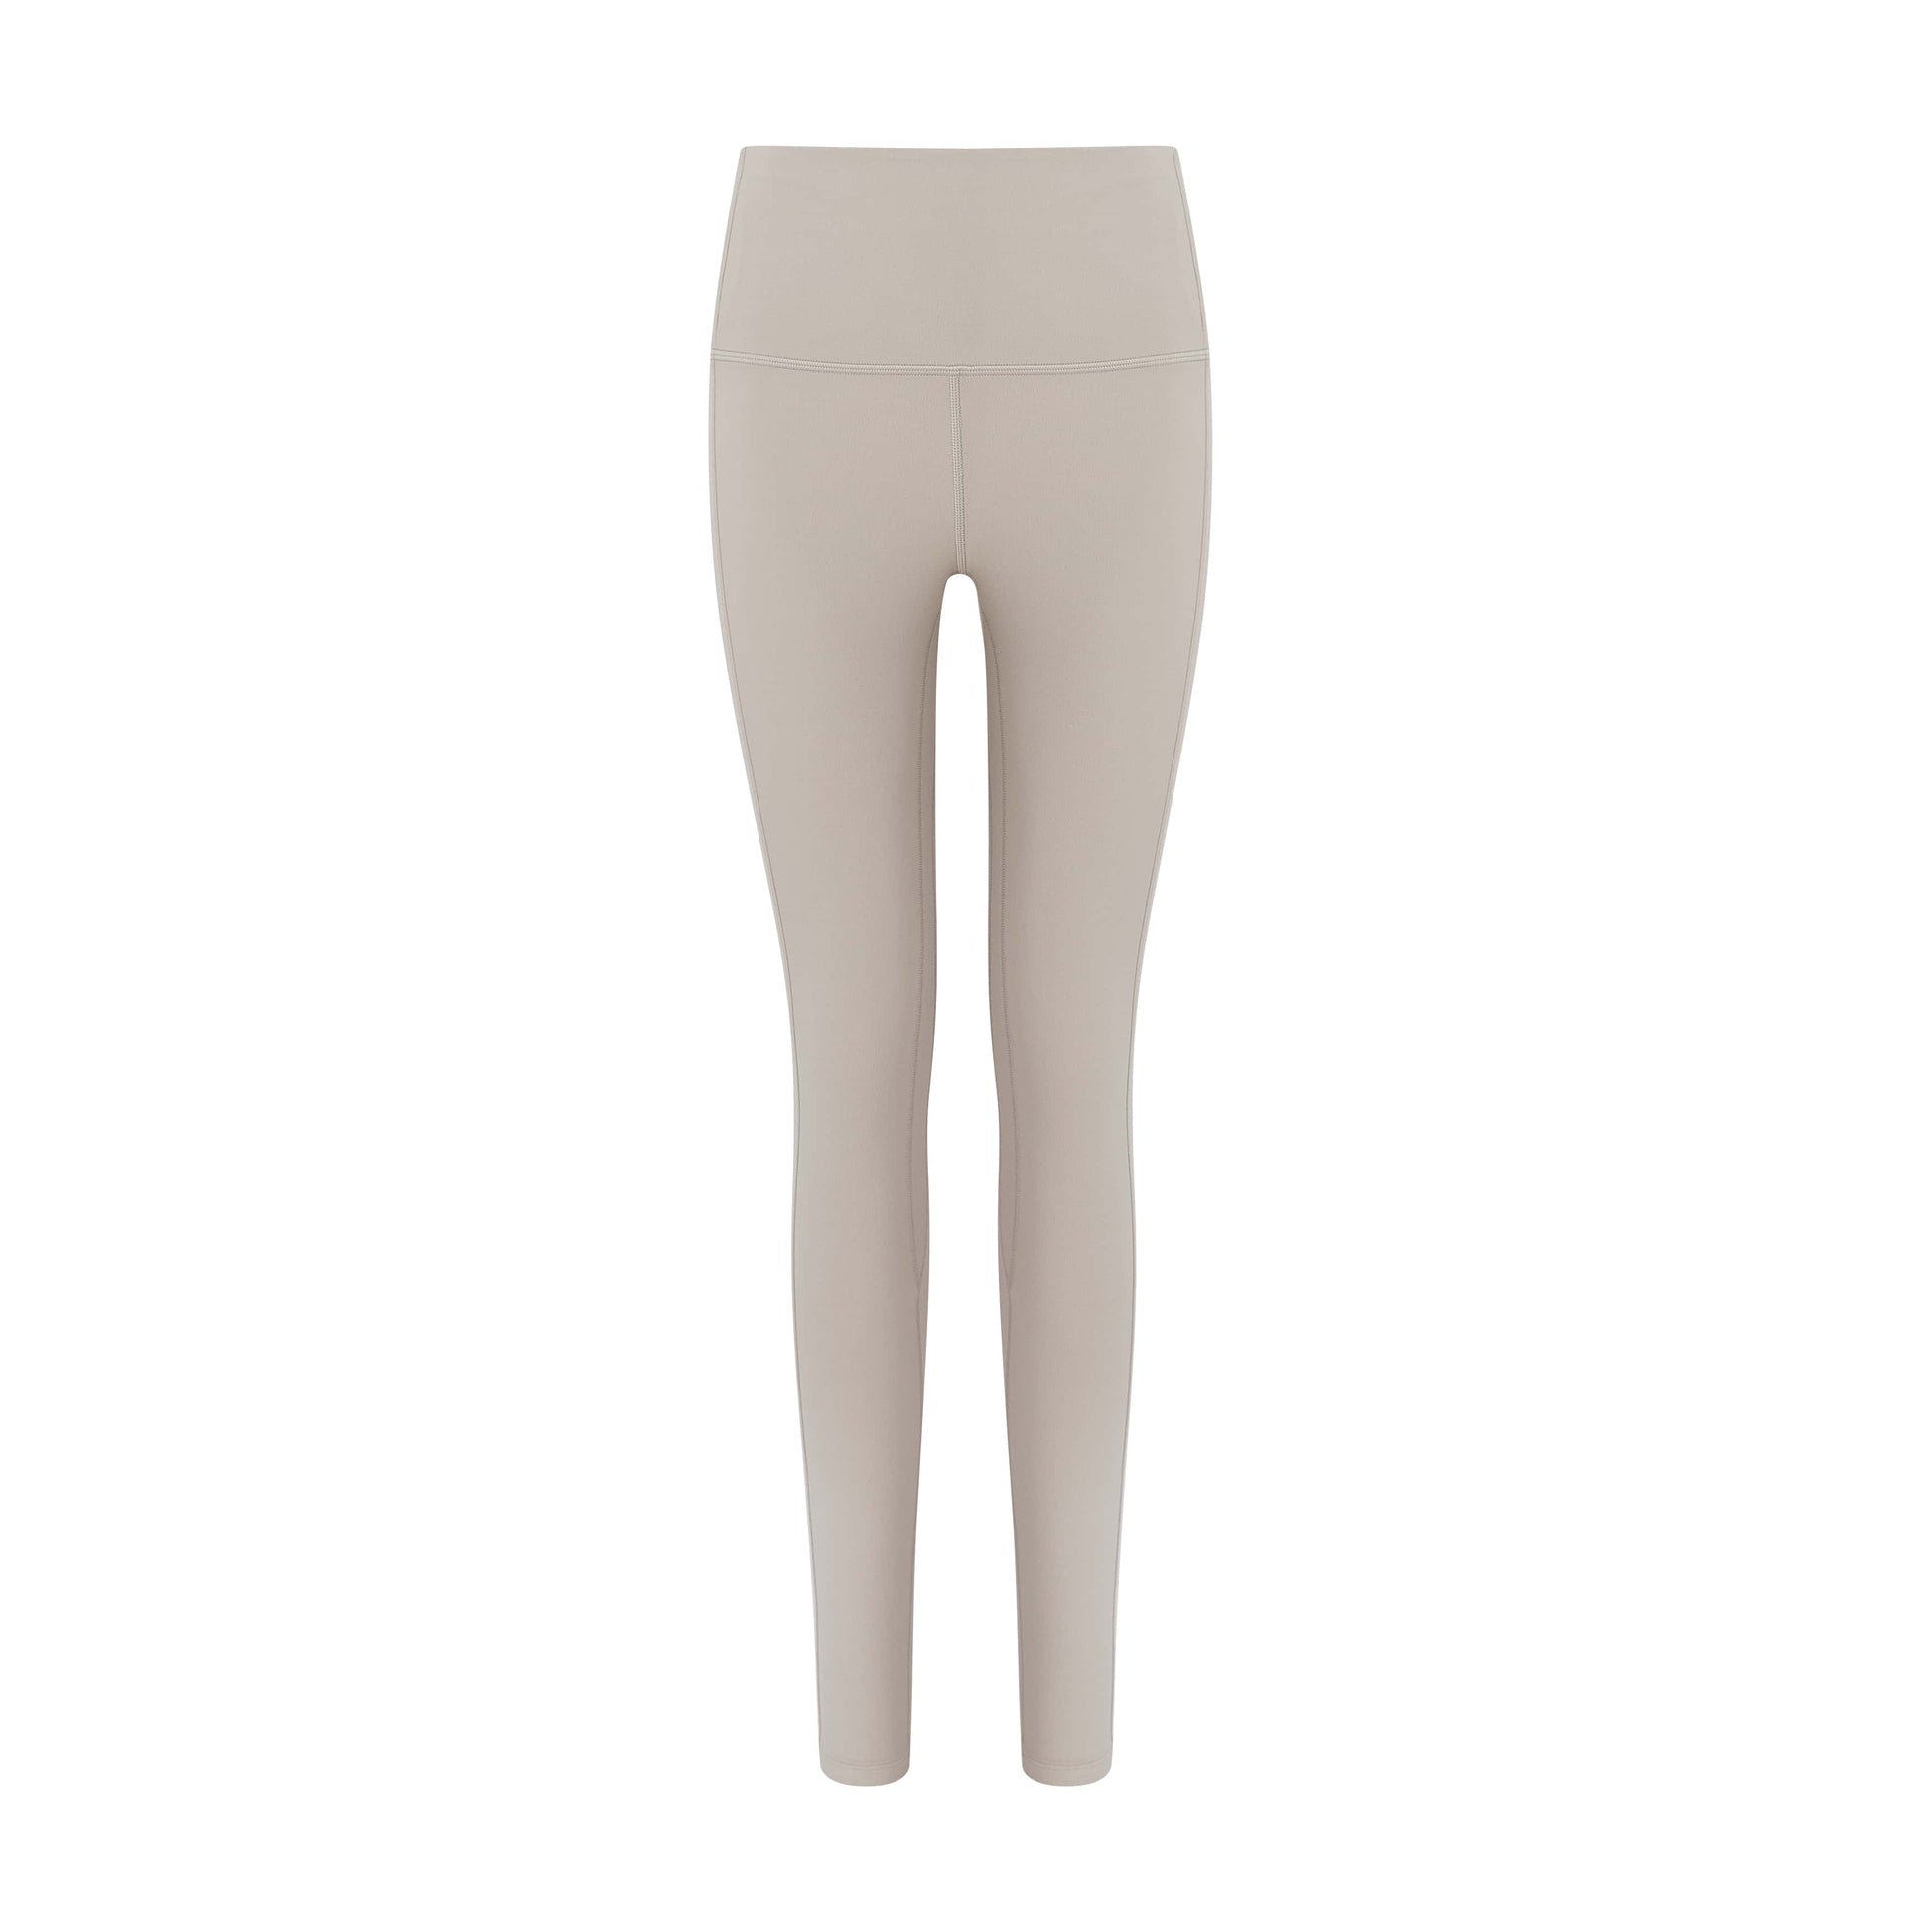 Bare Womens Low Impact Cross-Front High-Waist Leggings Style-AW20249